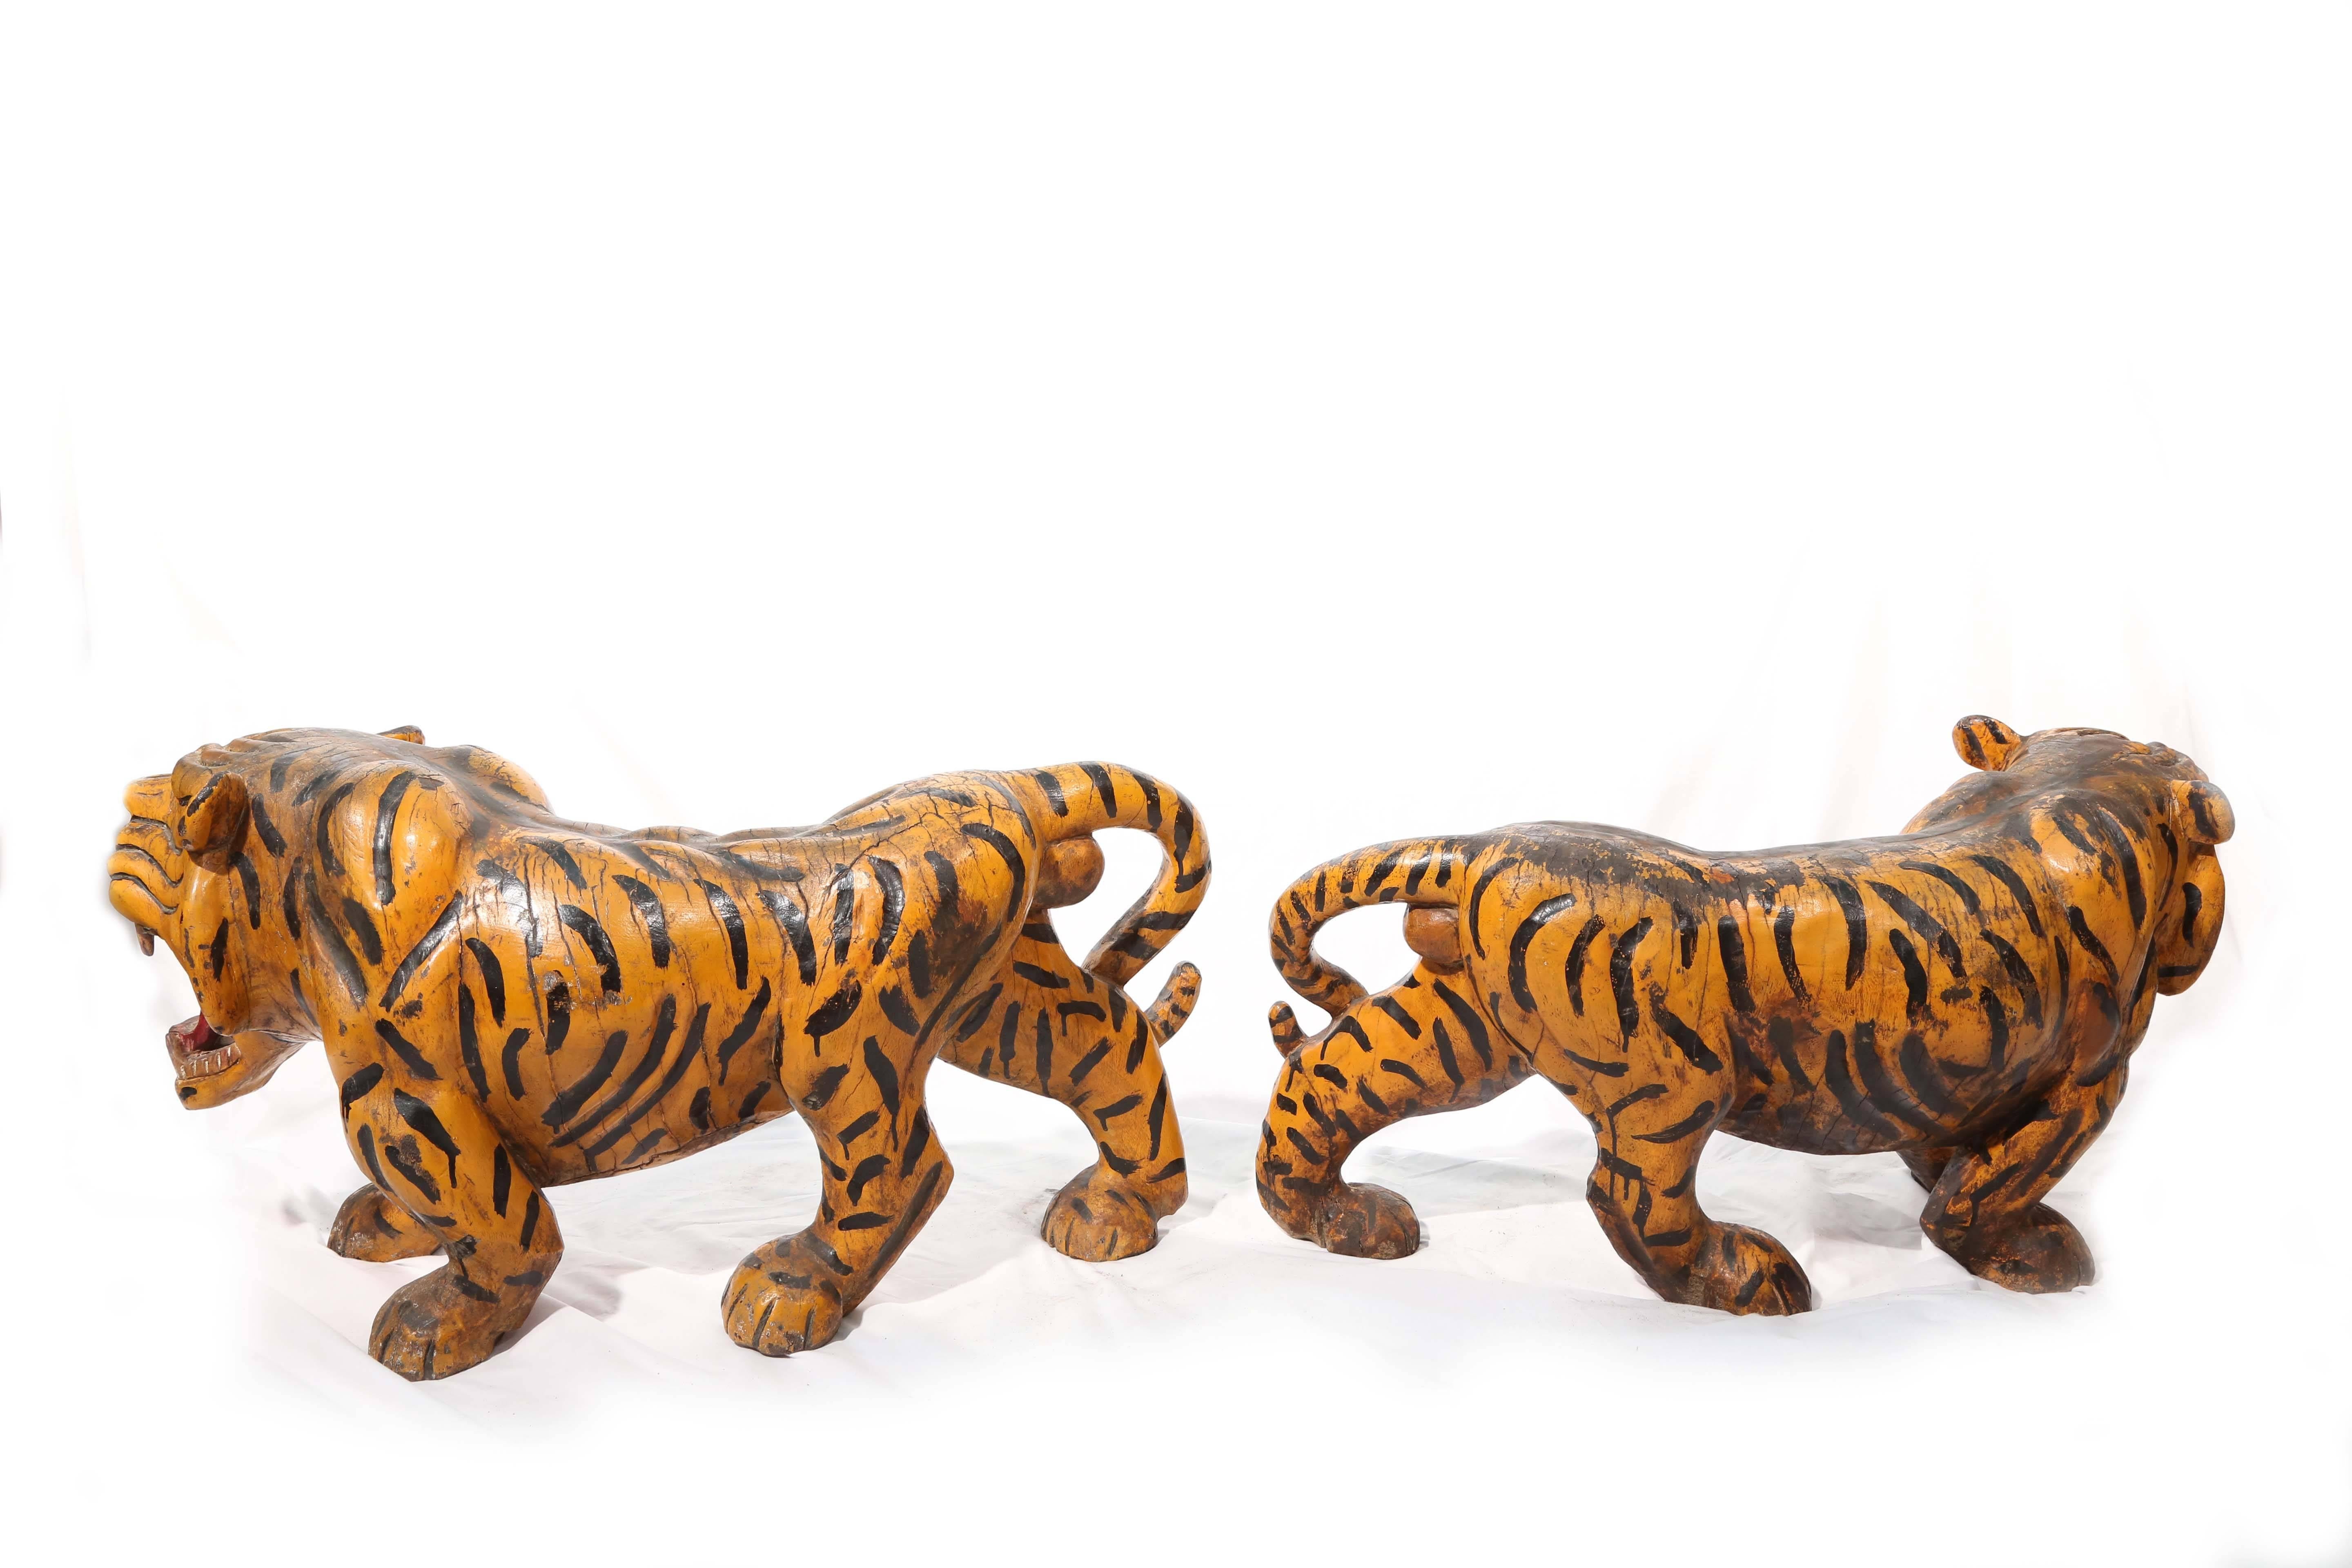 Sensational Pair of 19th Century Anglo-Indian Figure of Tigers 4